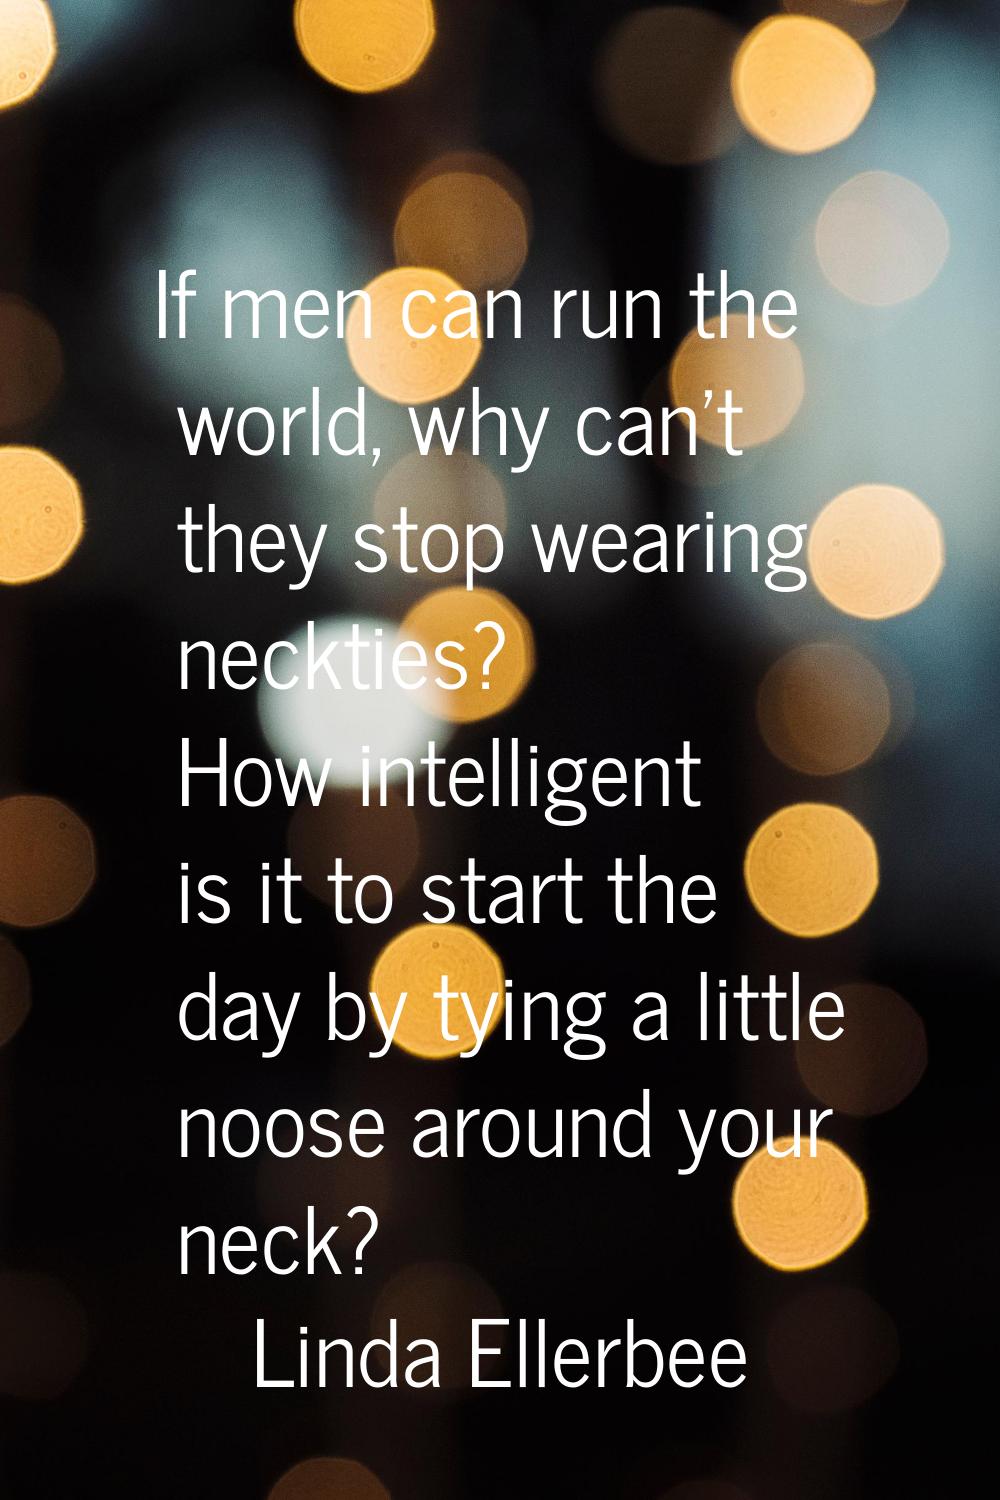 If men can run the world, why can't they stop wearing neckties? How intelligent is it to start the 